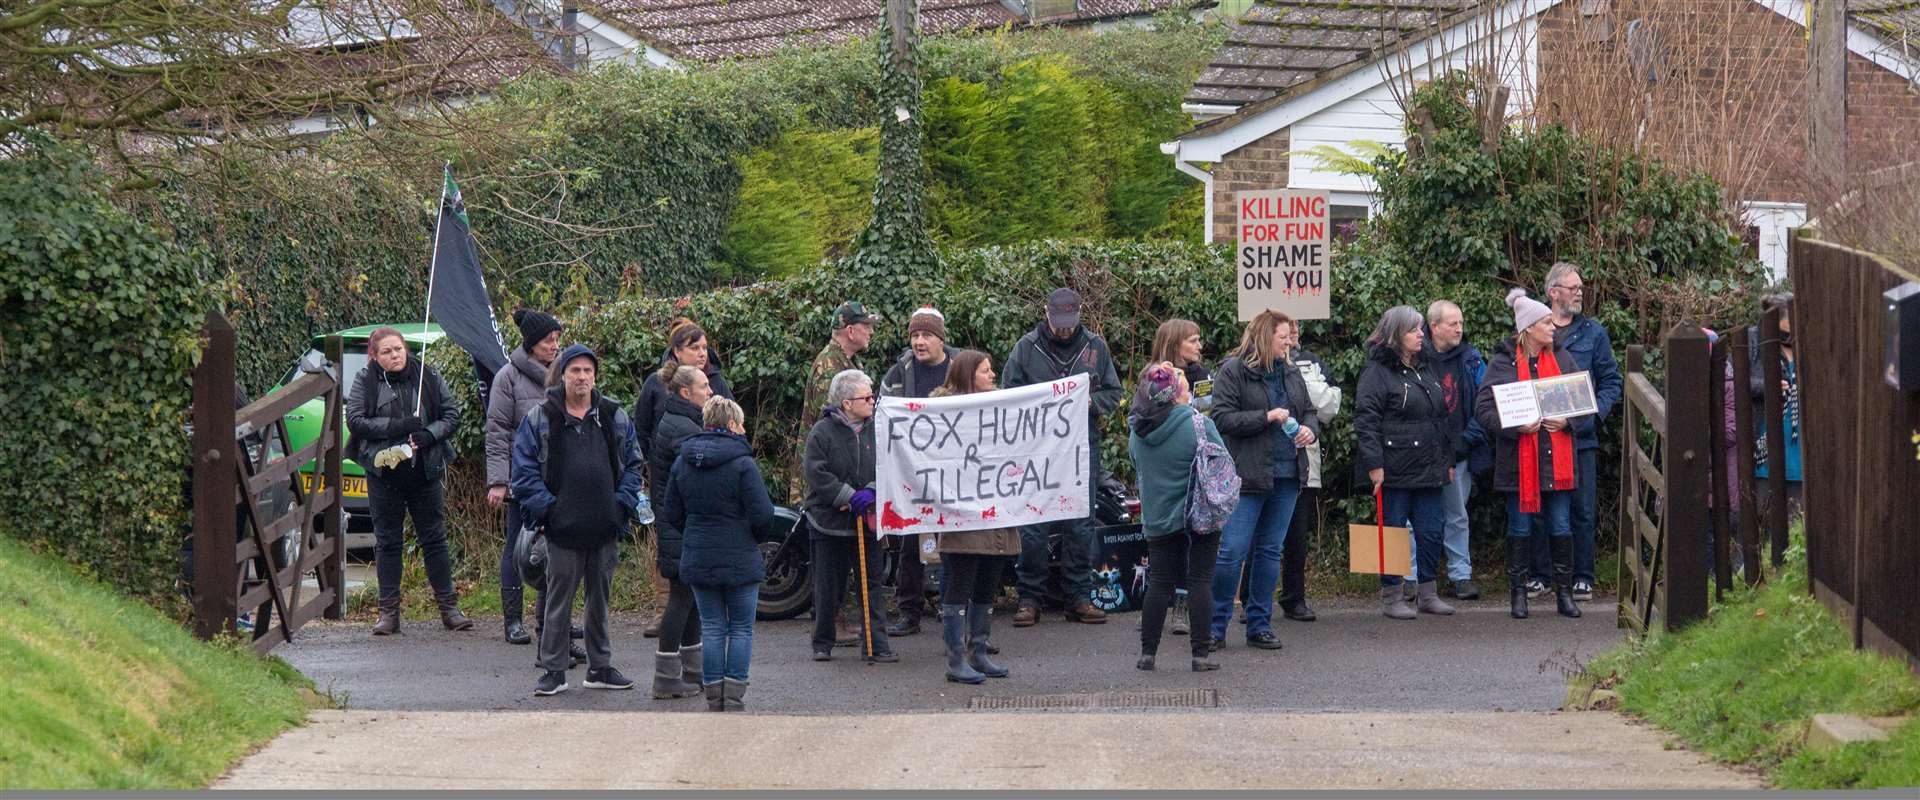 Anti-hunt protesters in Elham. Picture: Nick Onslow.